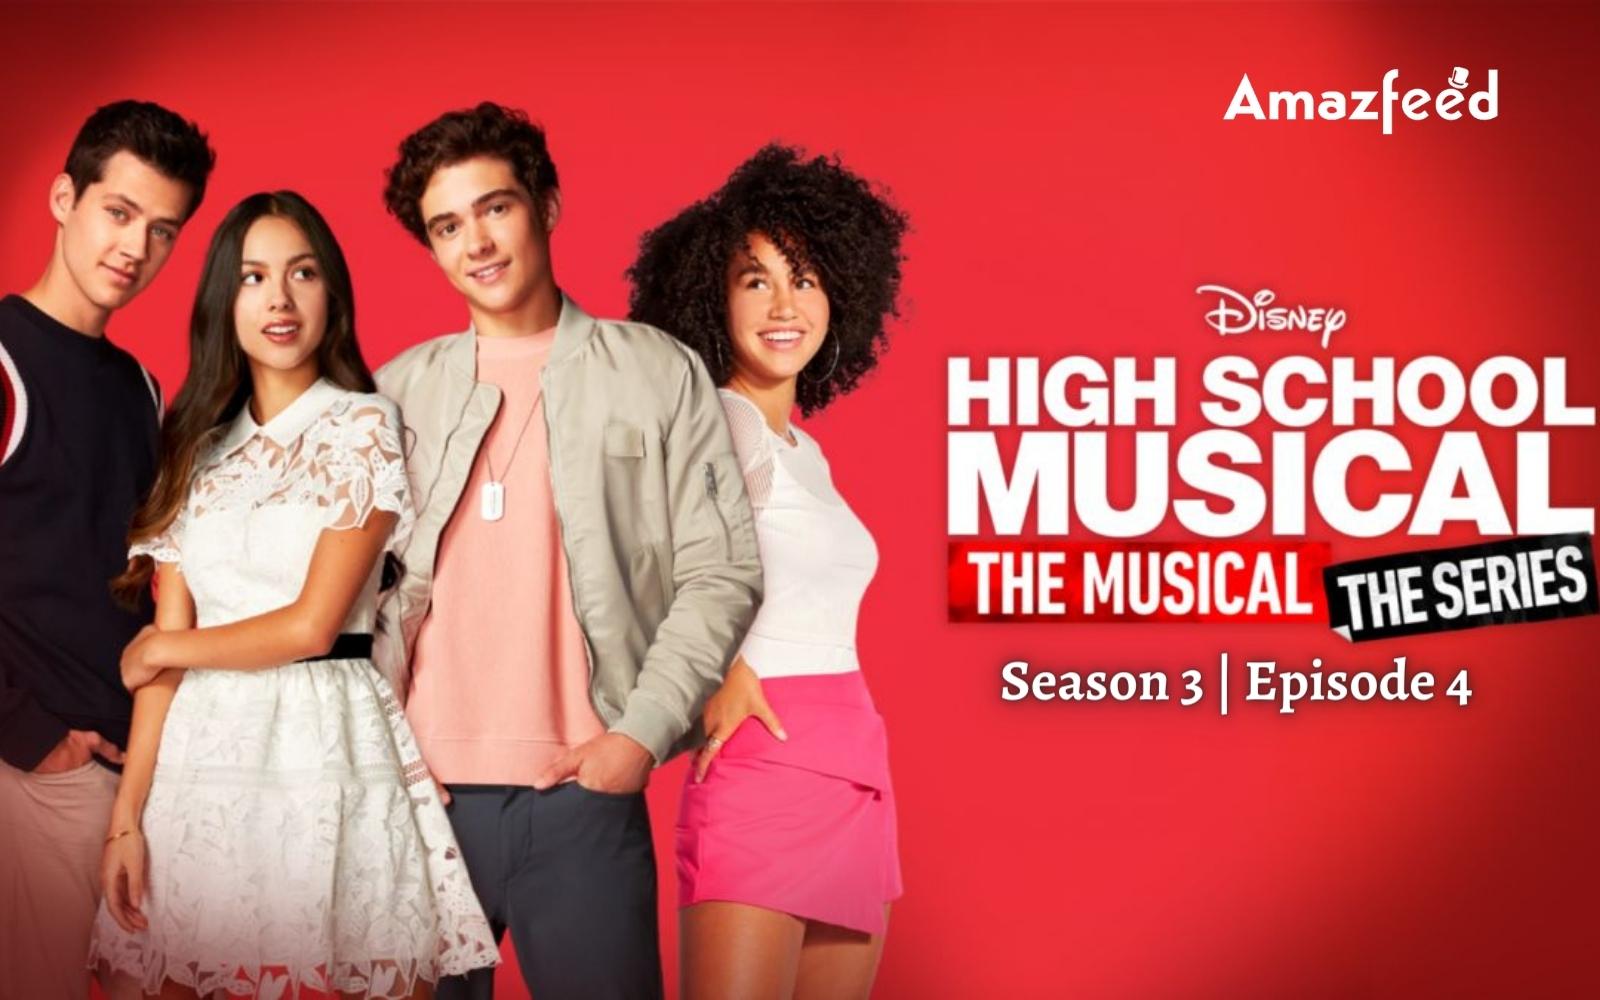 High School Musical: The Musical - The Series Season 3 Episode 4 ⇒ Countdown, Release Date, Spoilers, Recap, Cast & News Updates